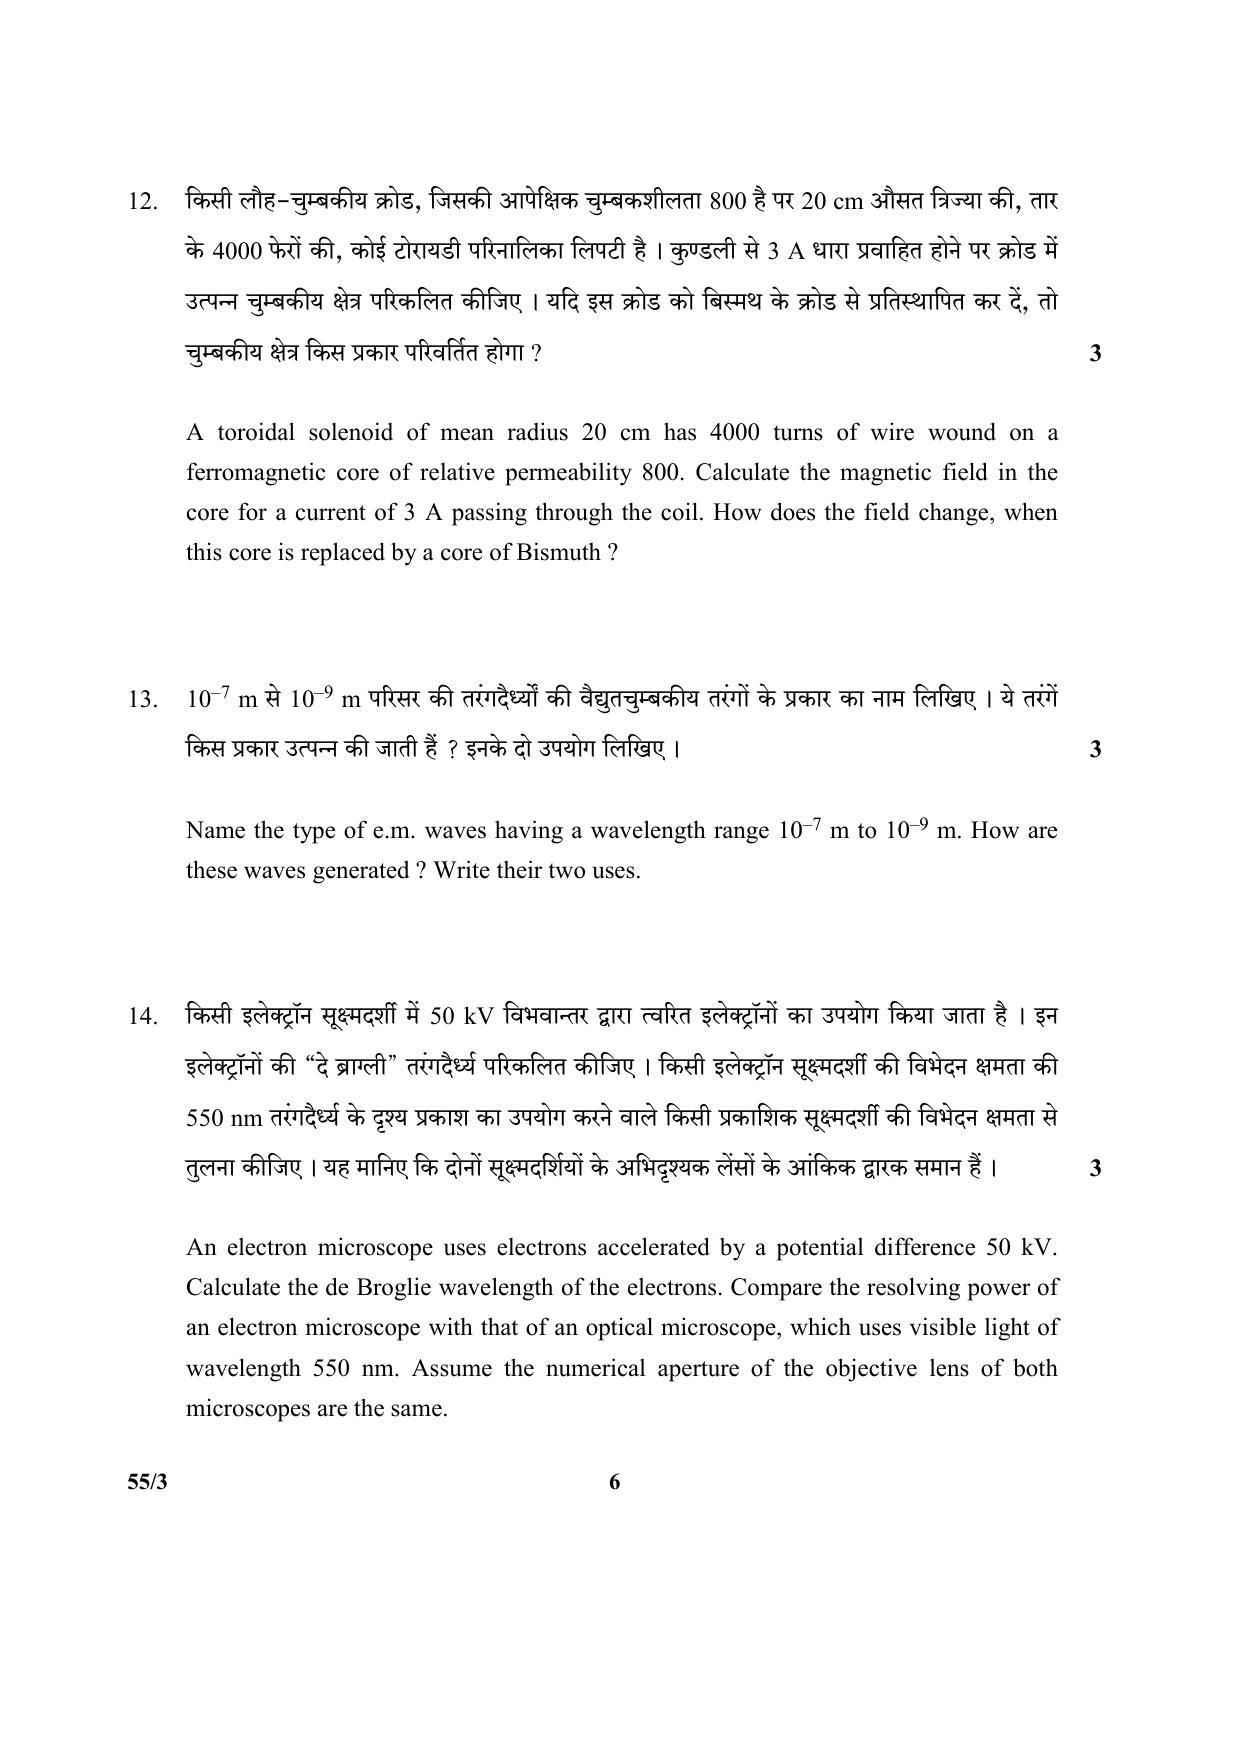 CBSE Class 12 55-3 (Physics) 2017-comptt Question Paper - Page 6